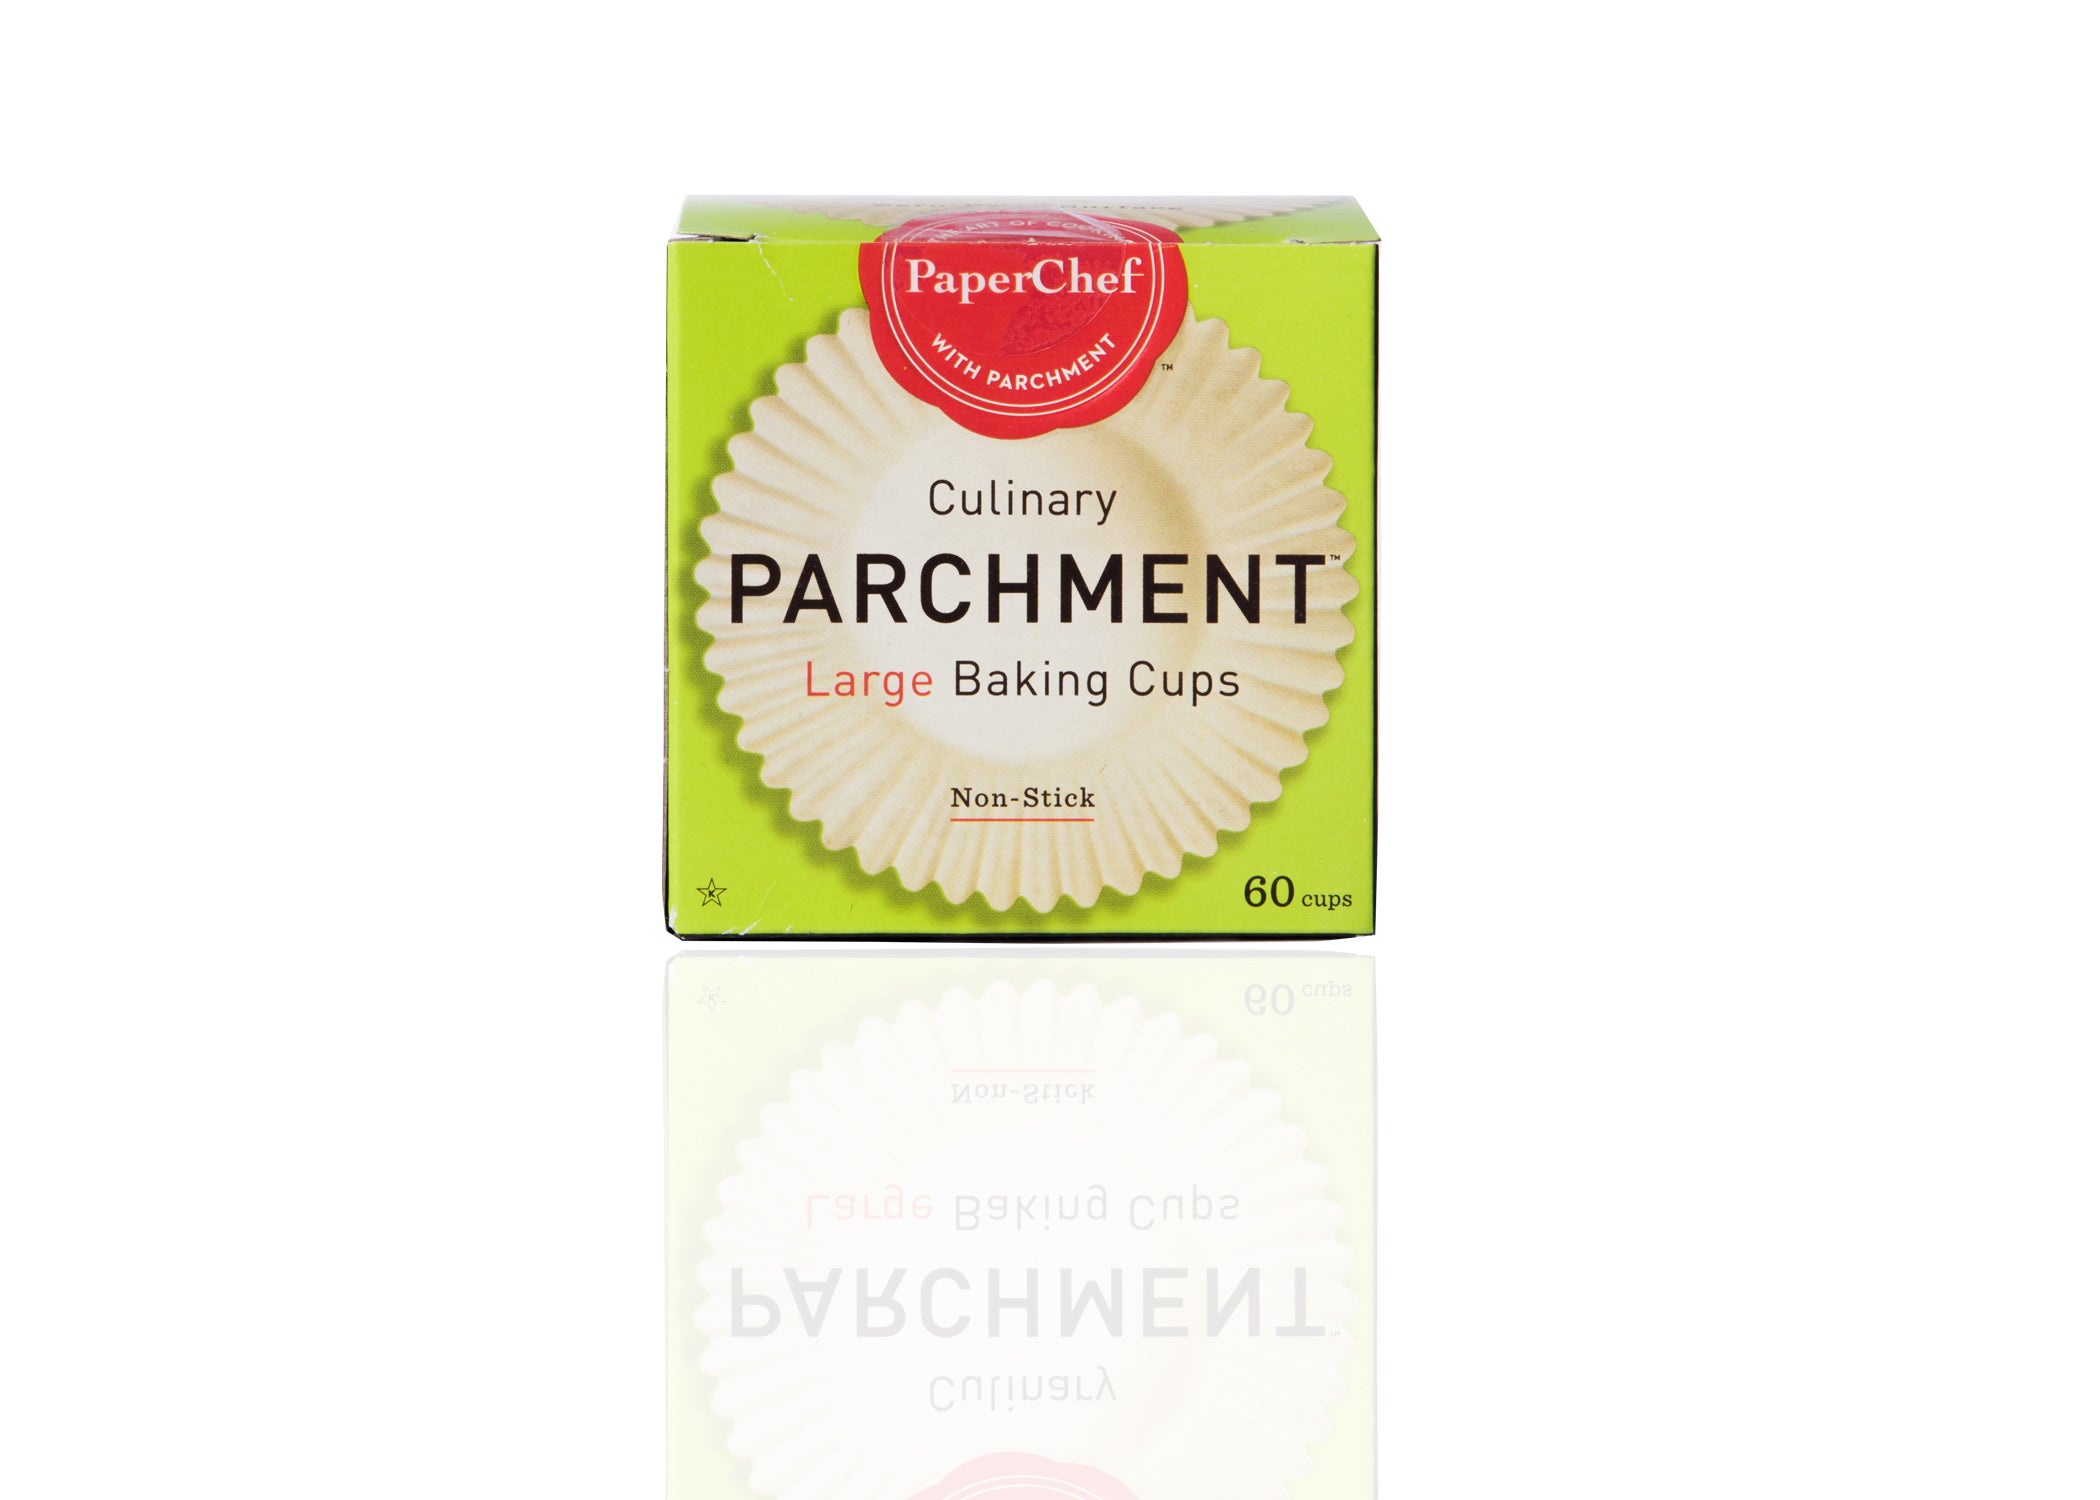 Paper Chef Culinary Parchment Baking Cups, Nonstick, Large - 60 cups